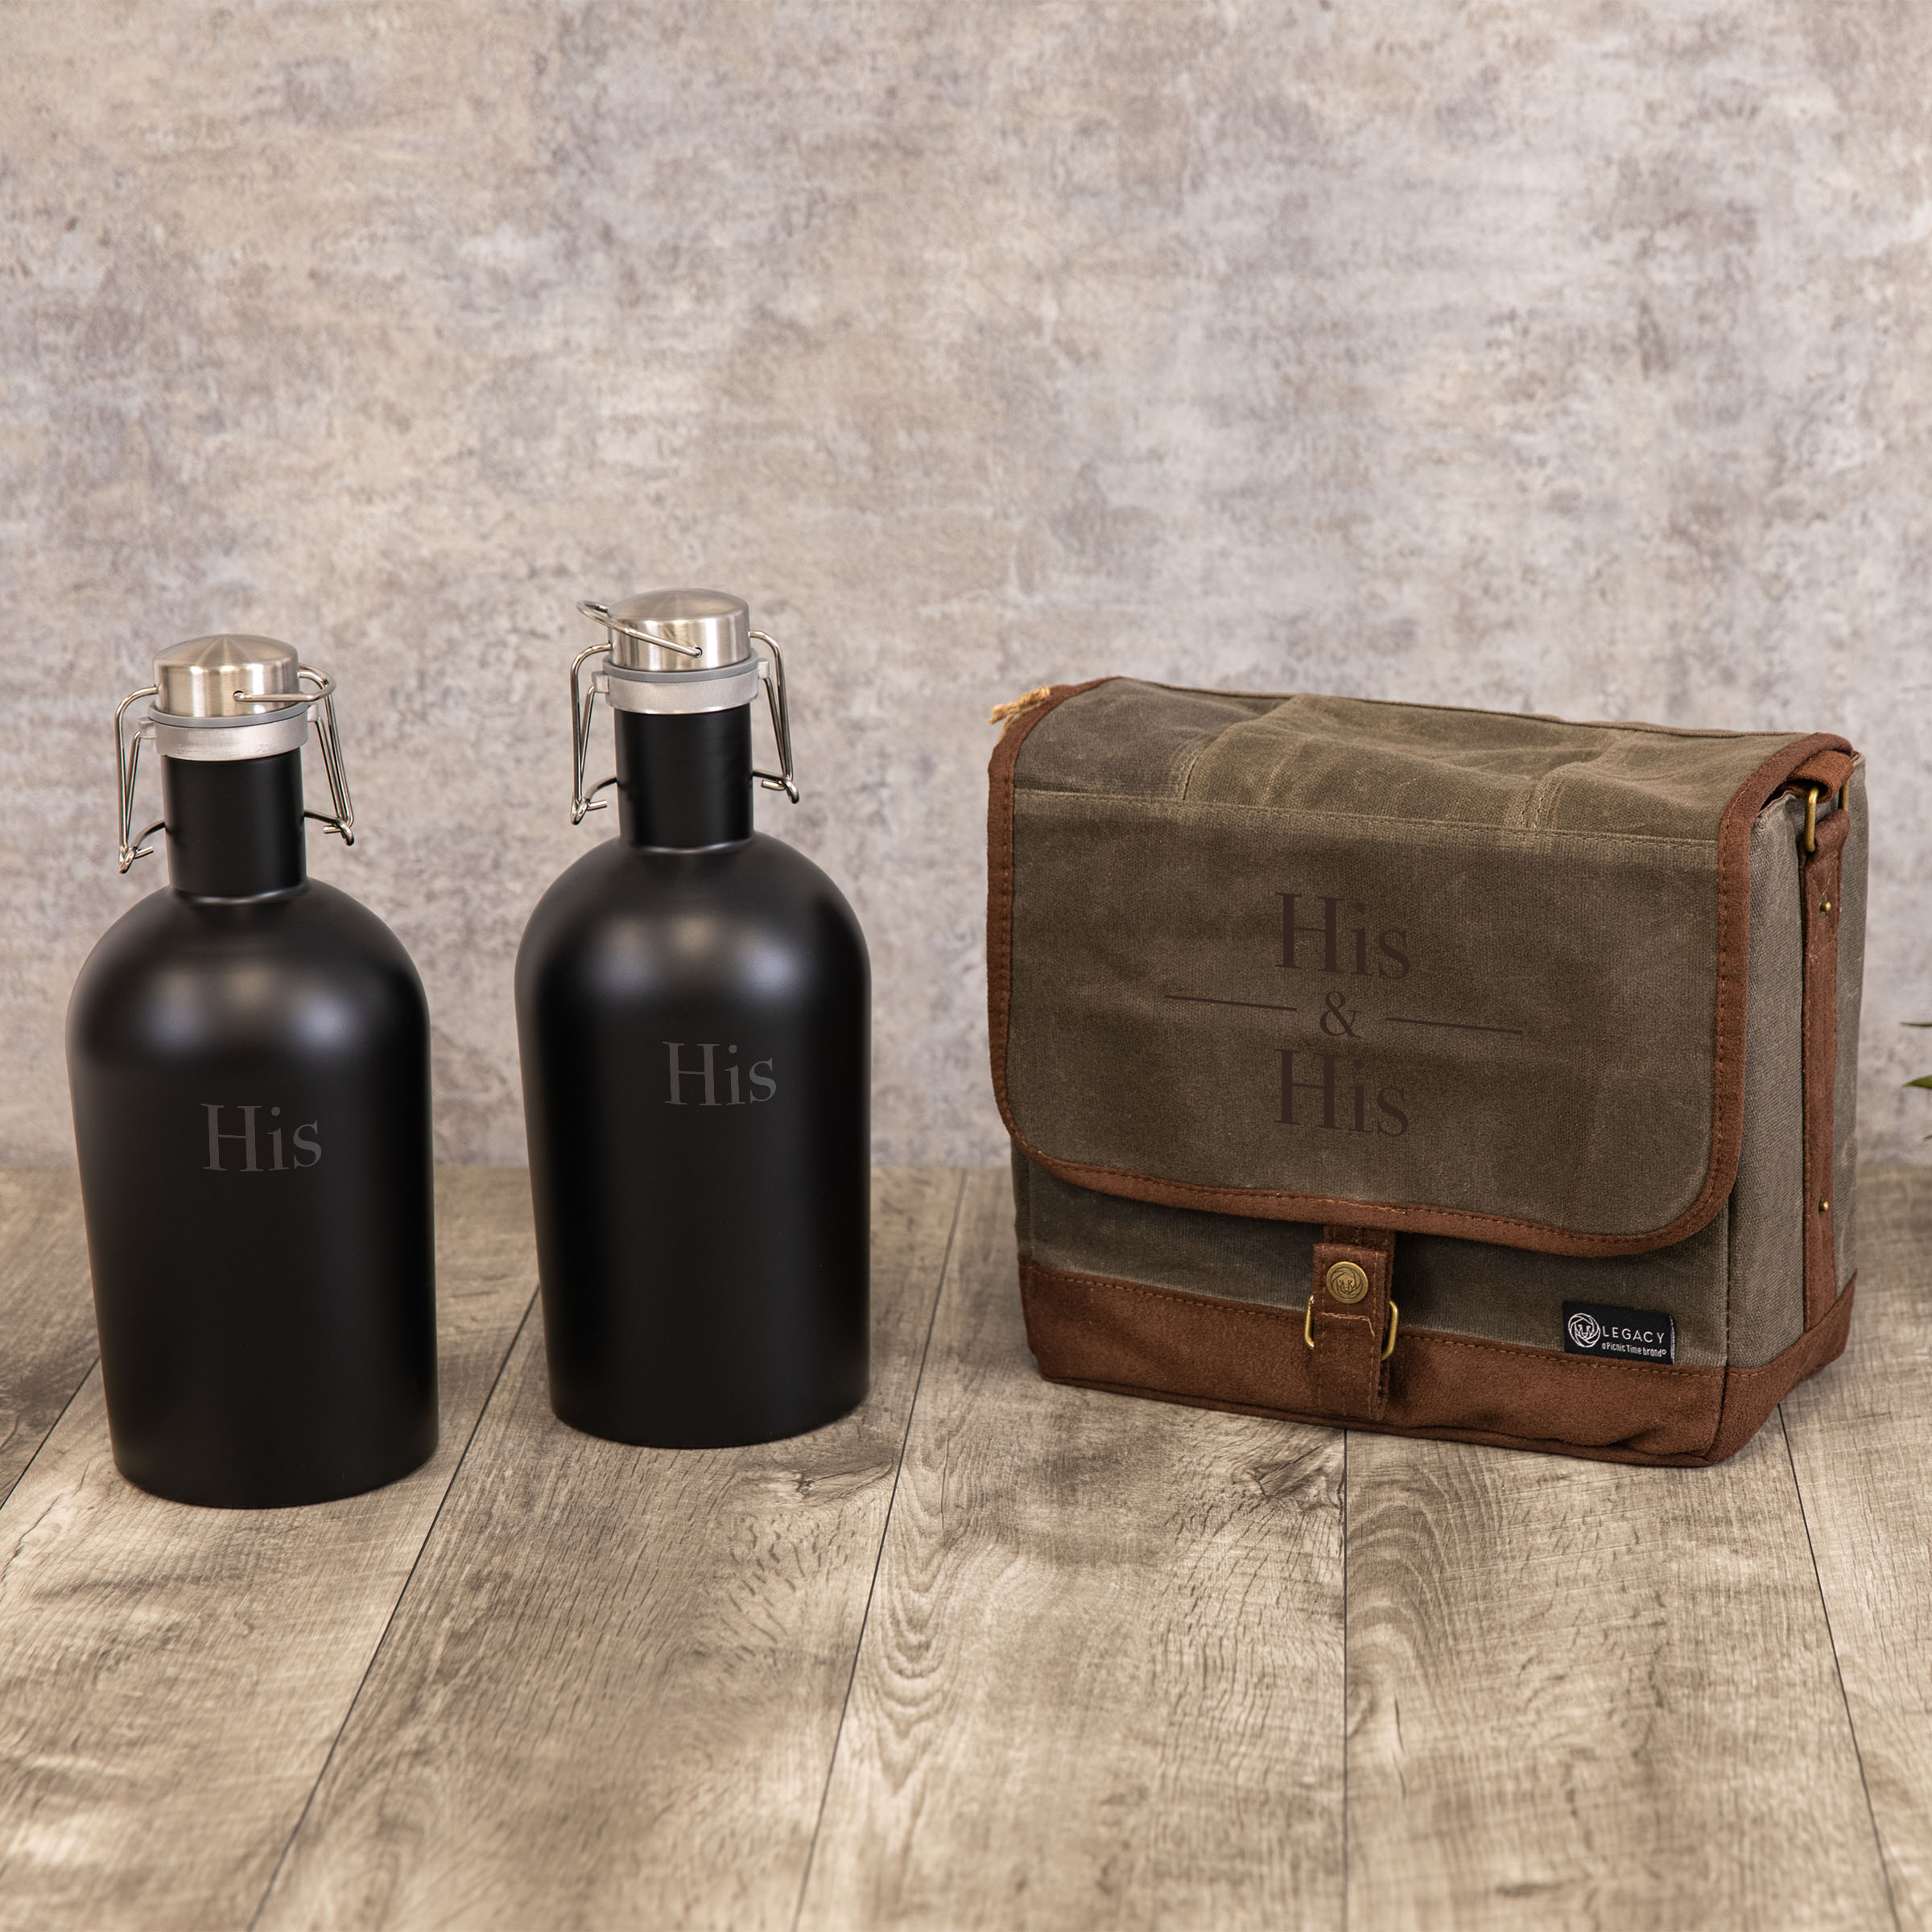 His/His - Wedding/Anniversary - Double Growler Tote with Growlers Gift Set